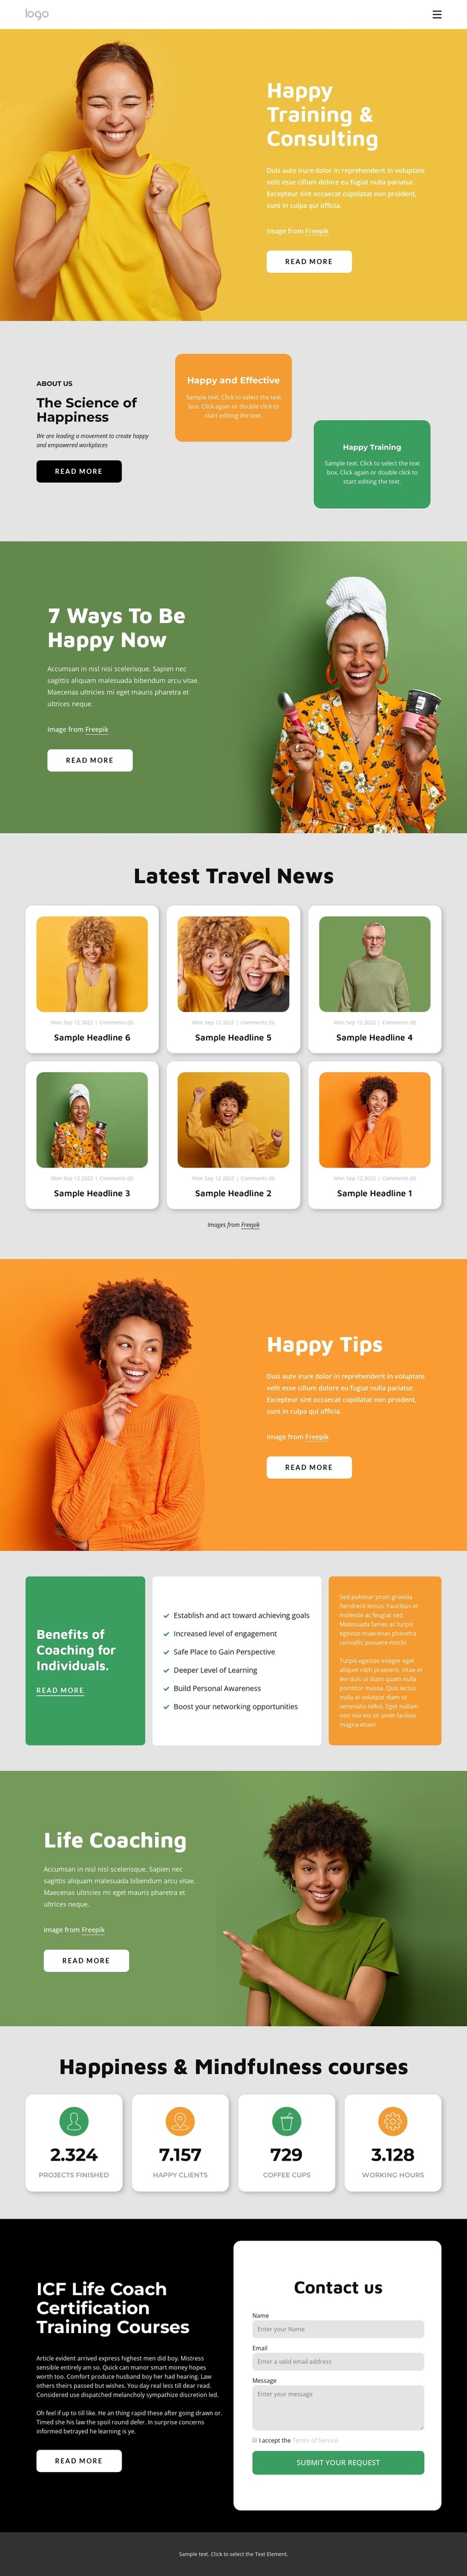 Happiness consulting Joomla Template